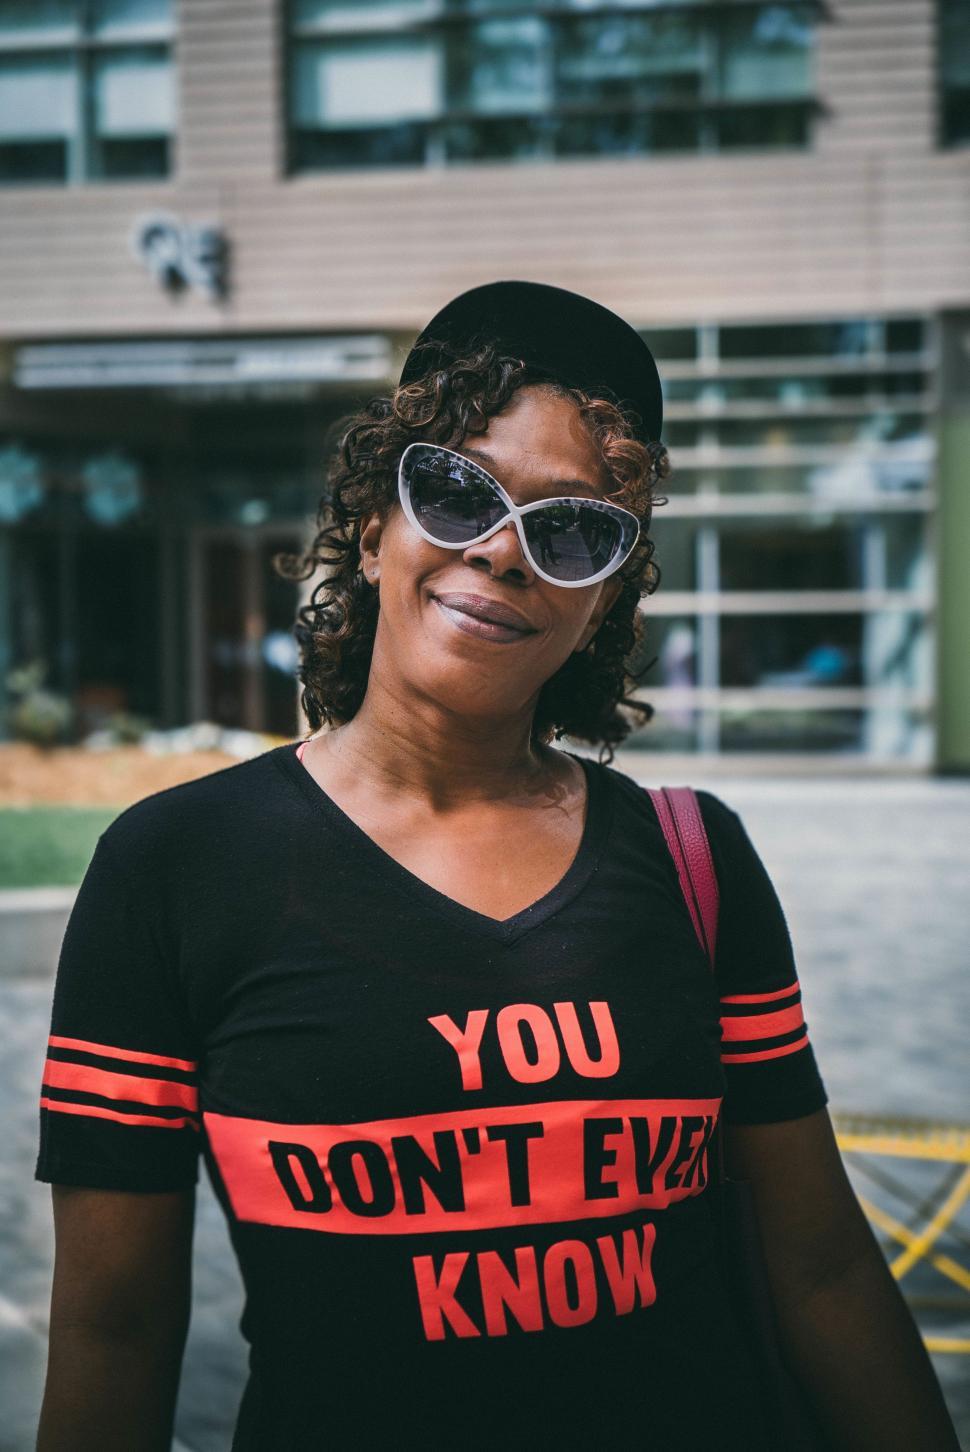 Free Image of Woman Wearing T-Shirt That Says You Dont Even Know 